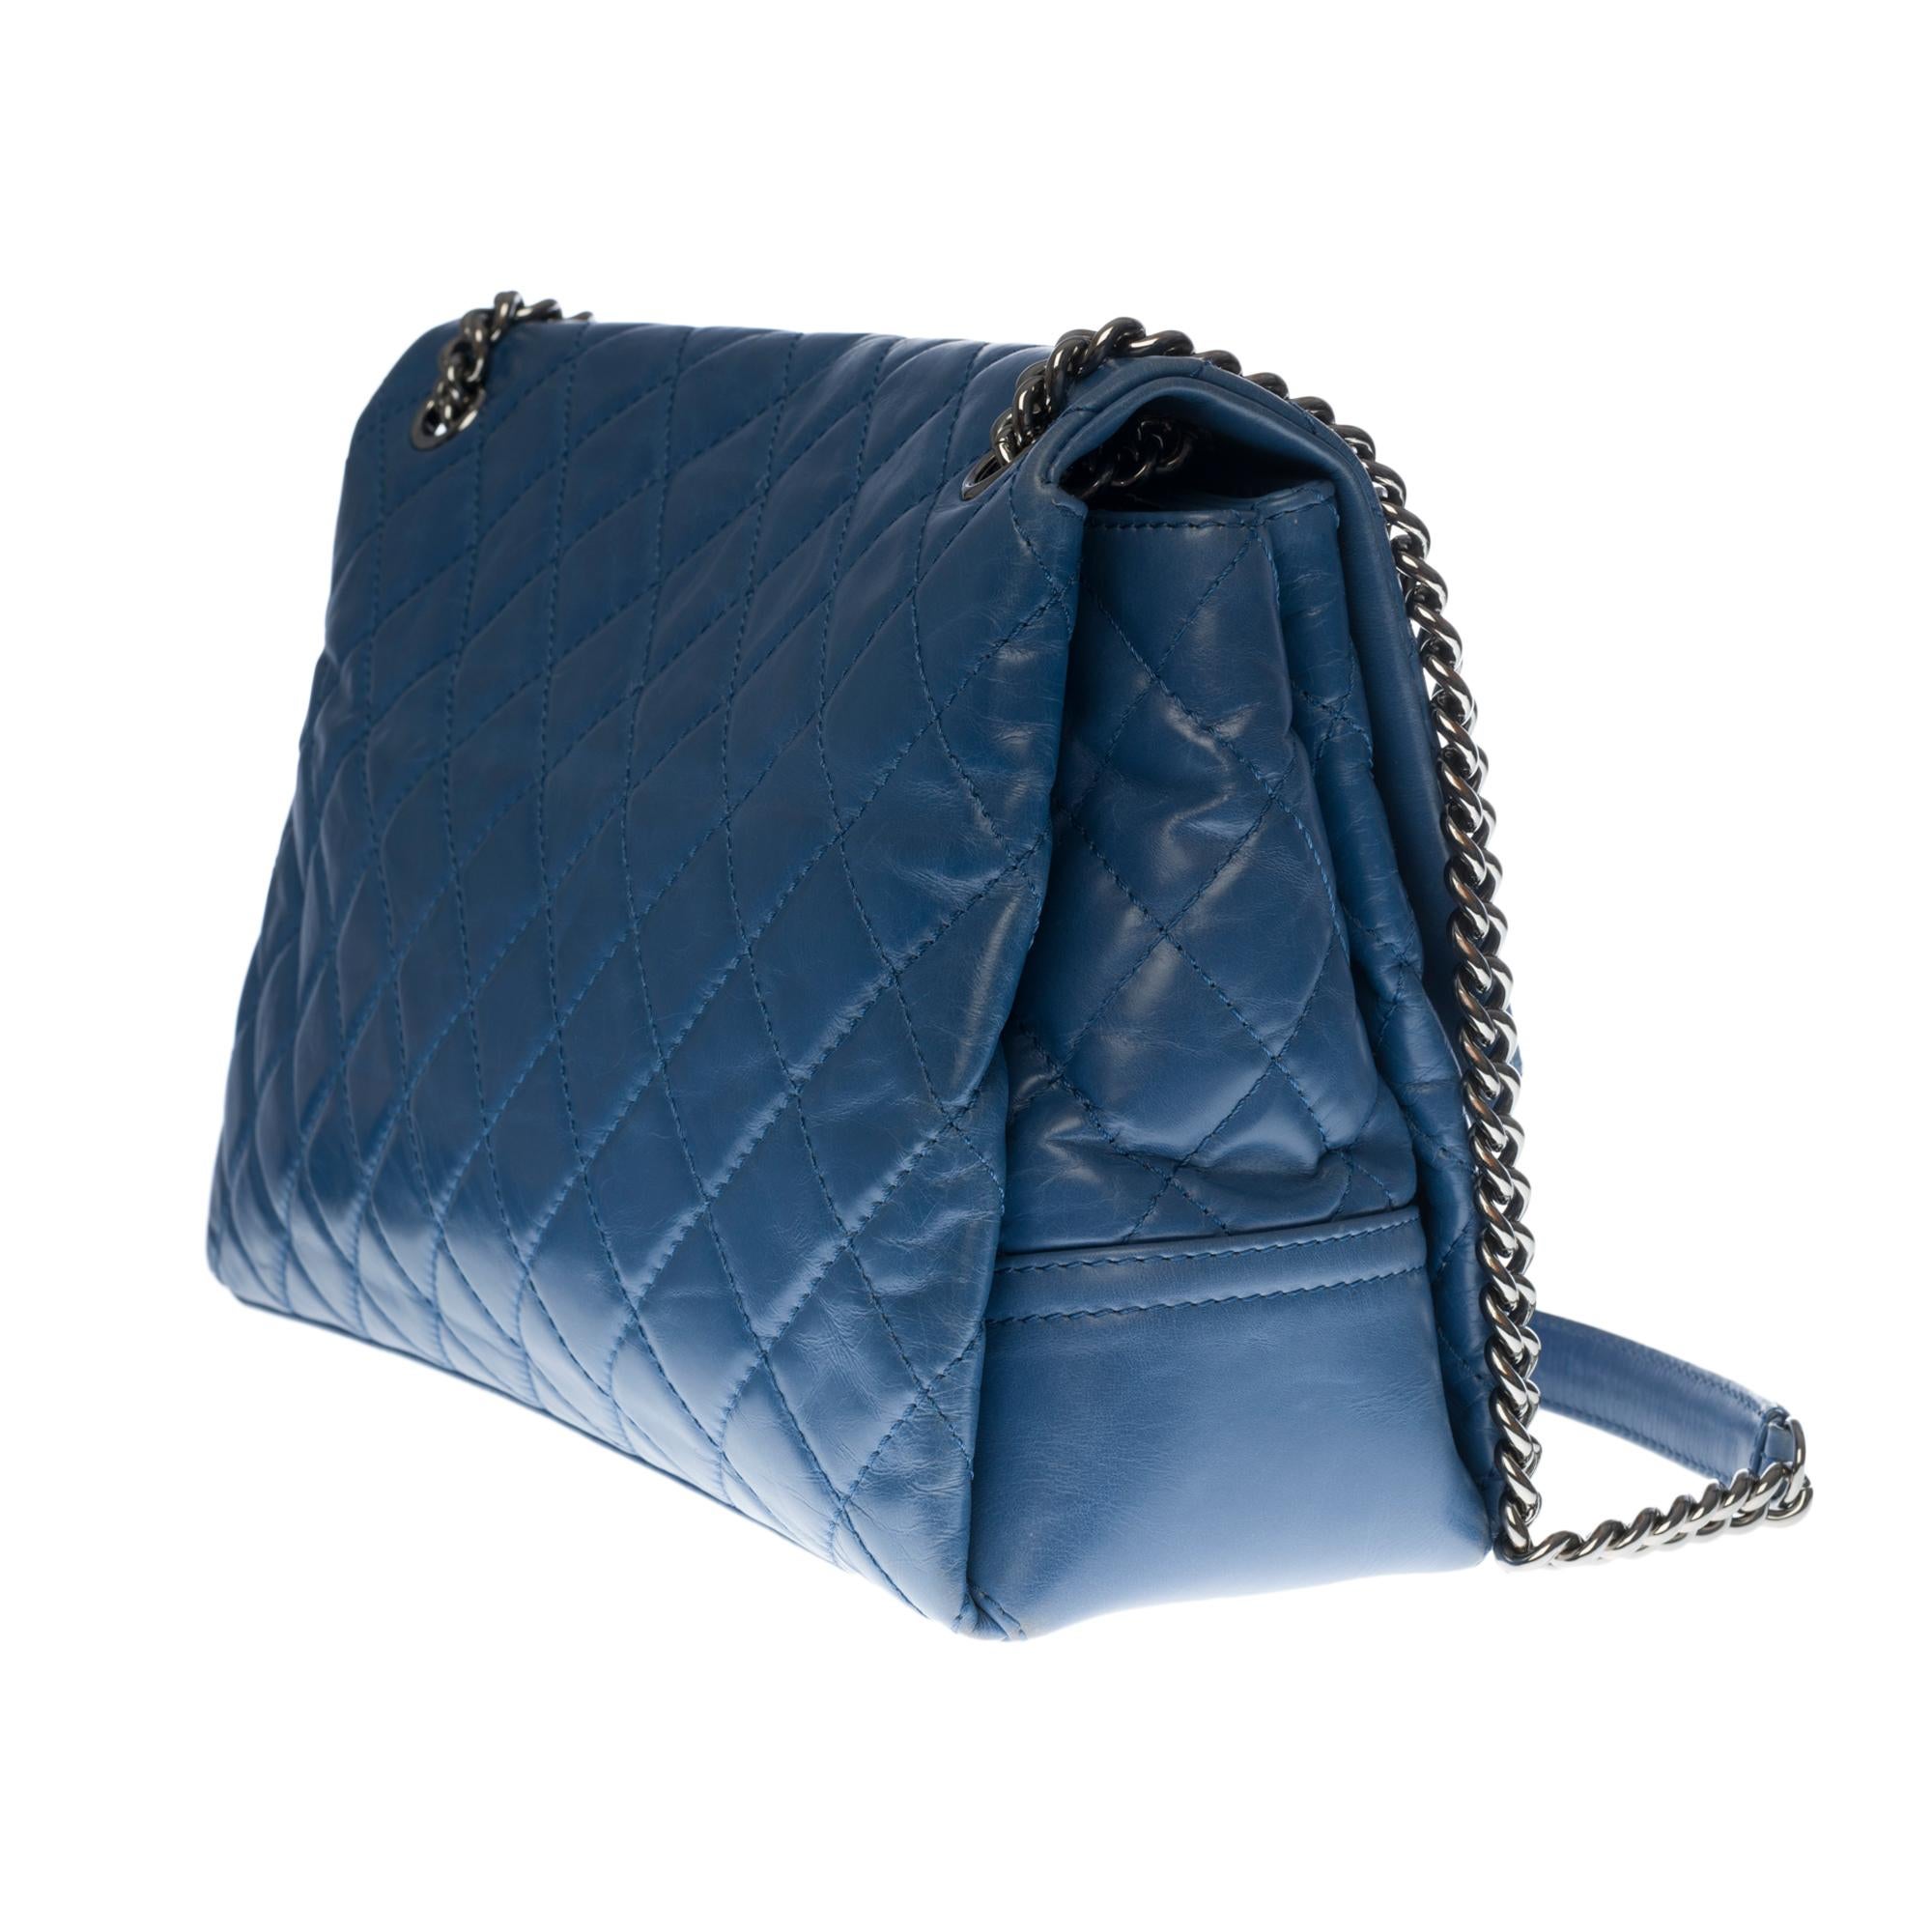 Women's Chanel Classic Maxi Flap shoulder bag in blue quilted lambskin, SHW For Sale